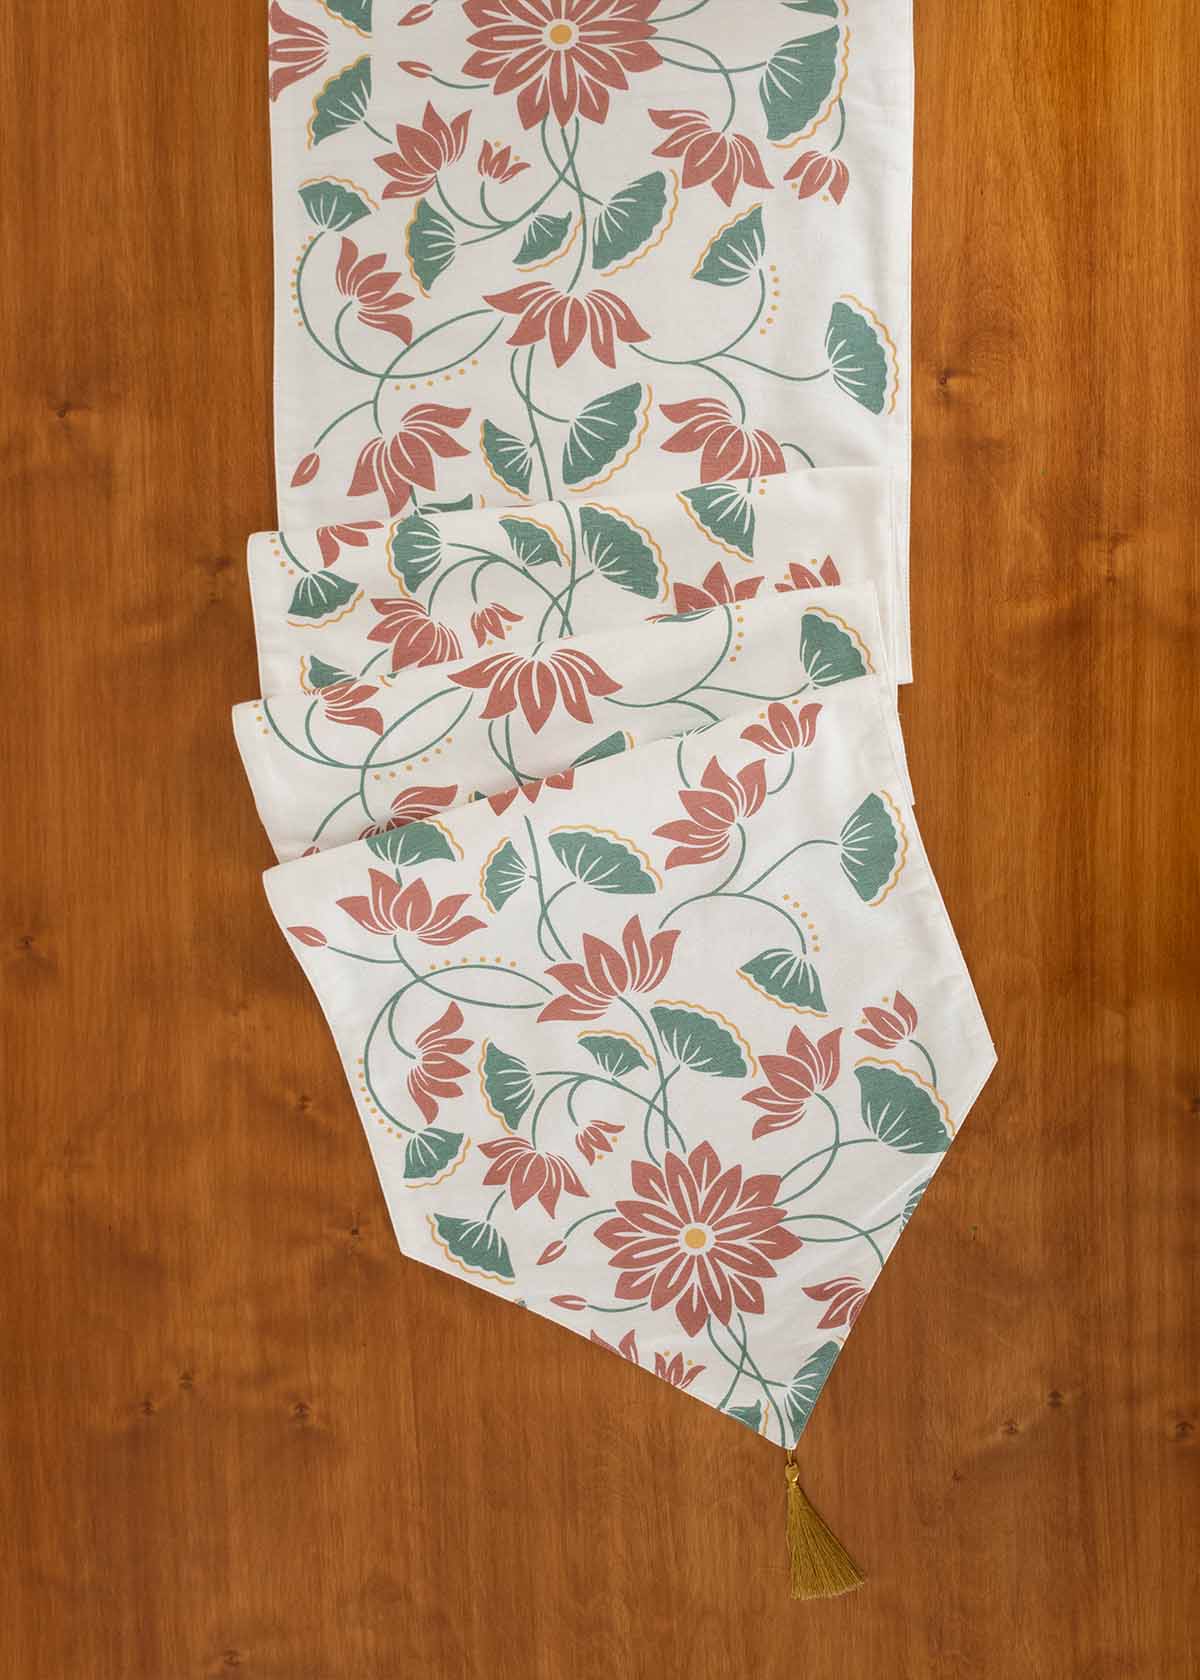 Lotus Blossom Printed Cotton Table Runner - Multicolor